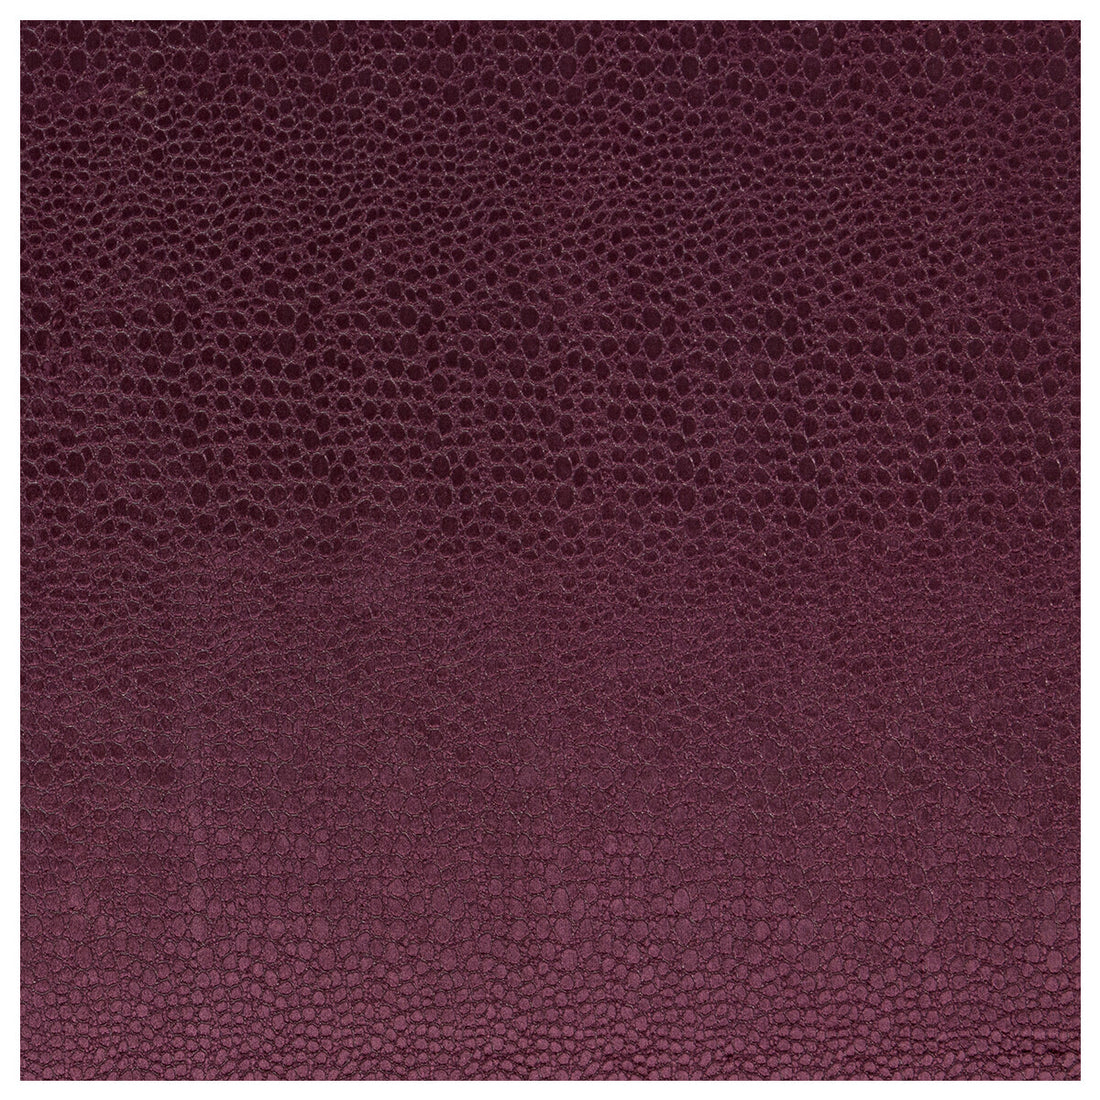 Pulse fabric in damson color - pattern F0469/06.CAC.0 - by Clarke And Clarke in the Clarke &amp; Clarke Tempo Velvets collection